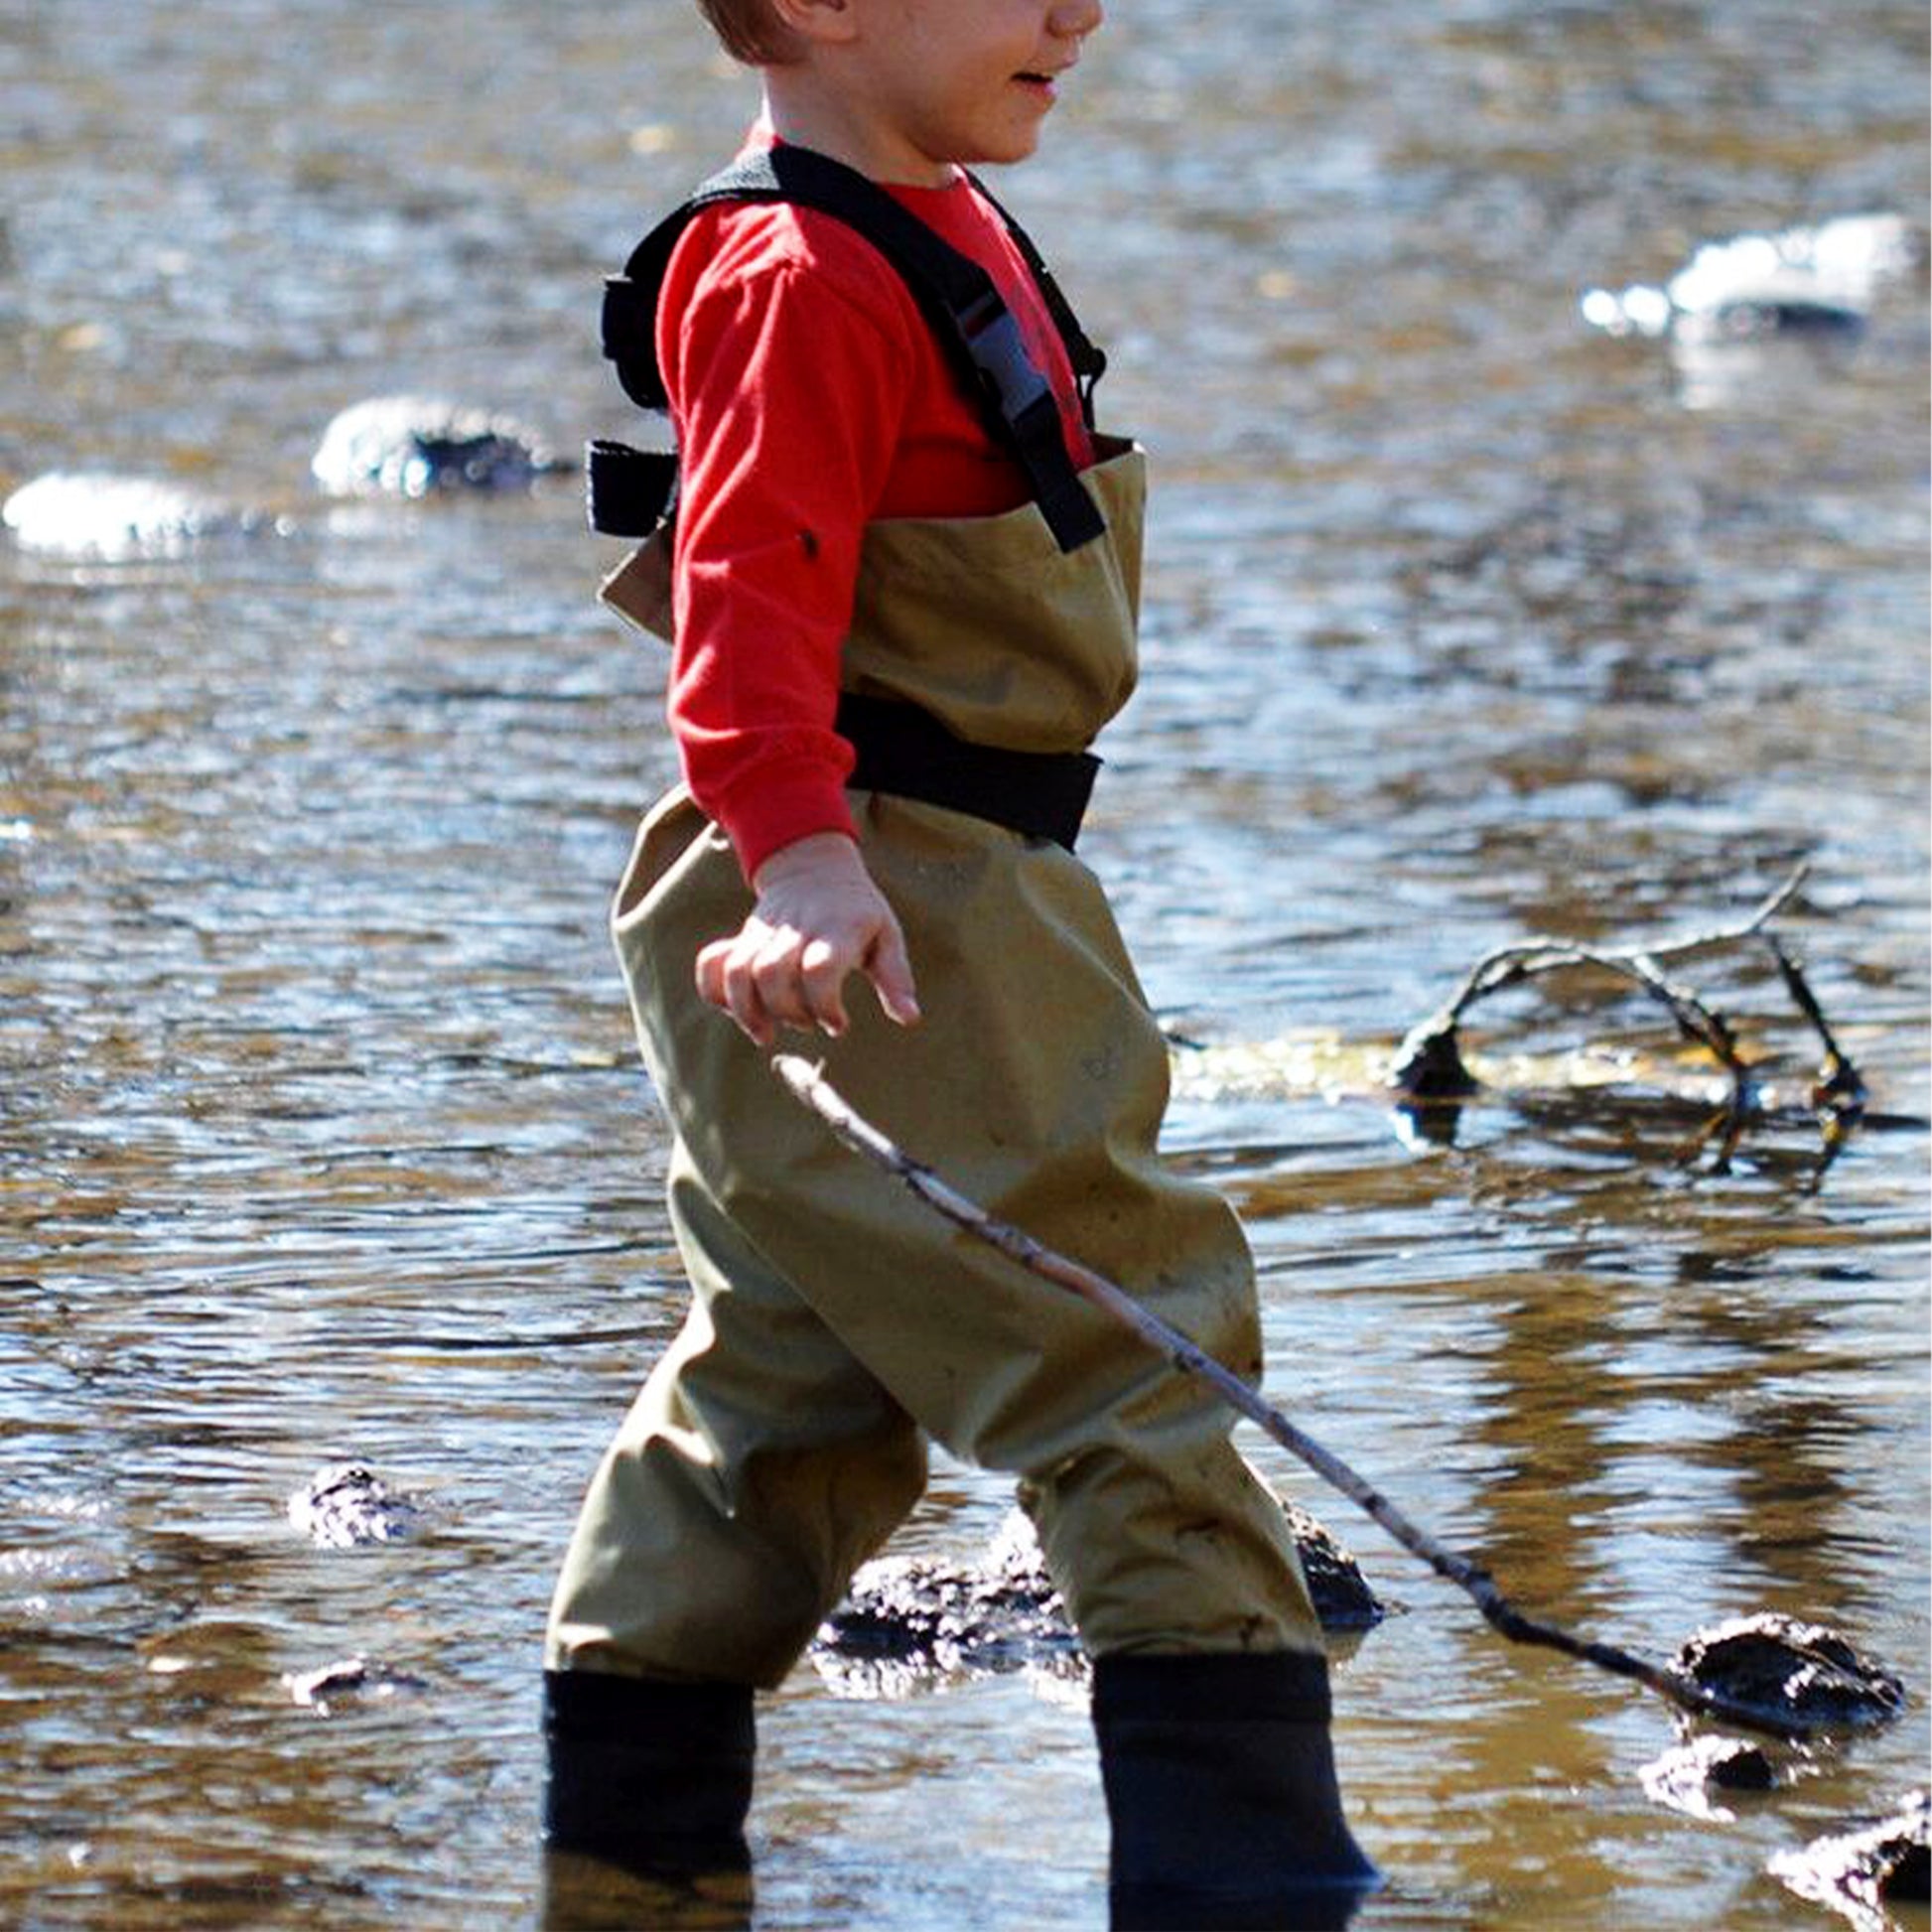 Oakiwear Breathable Youth Kids Chest Waders Children Toddler, Tan – Tuff  Kids Outdoors